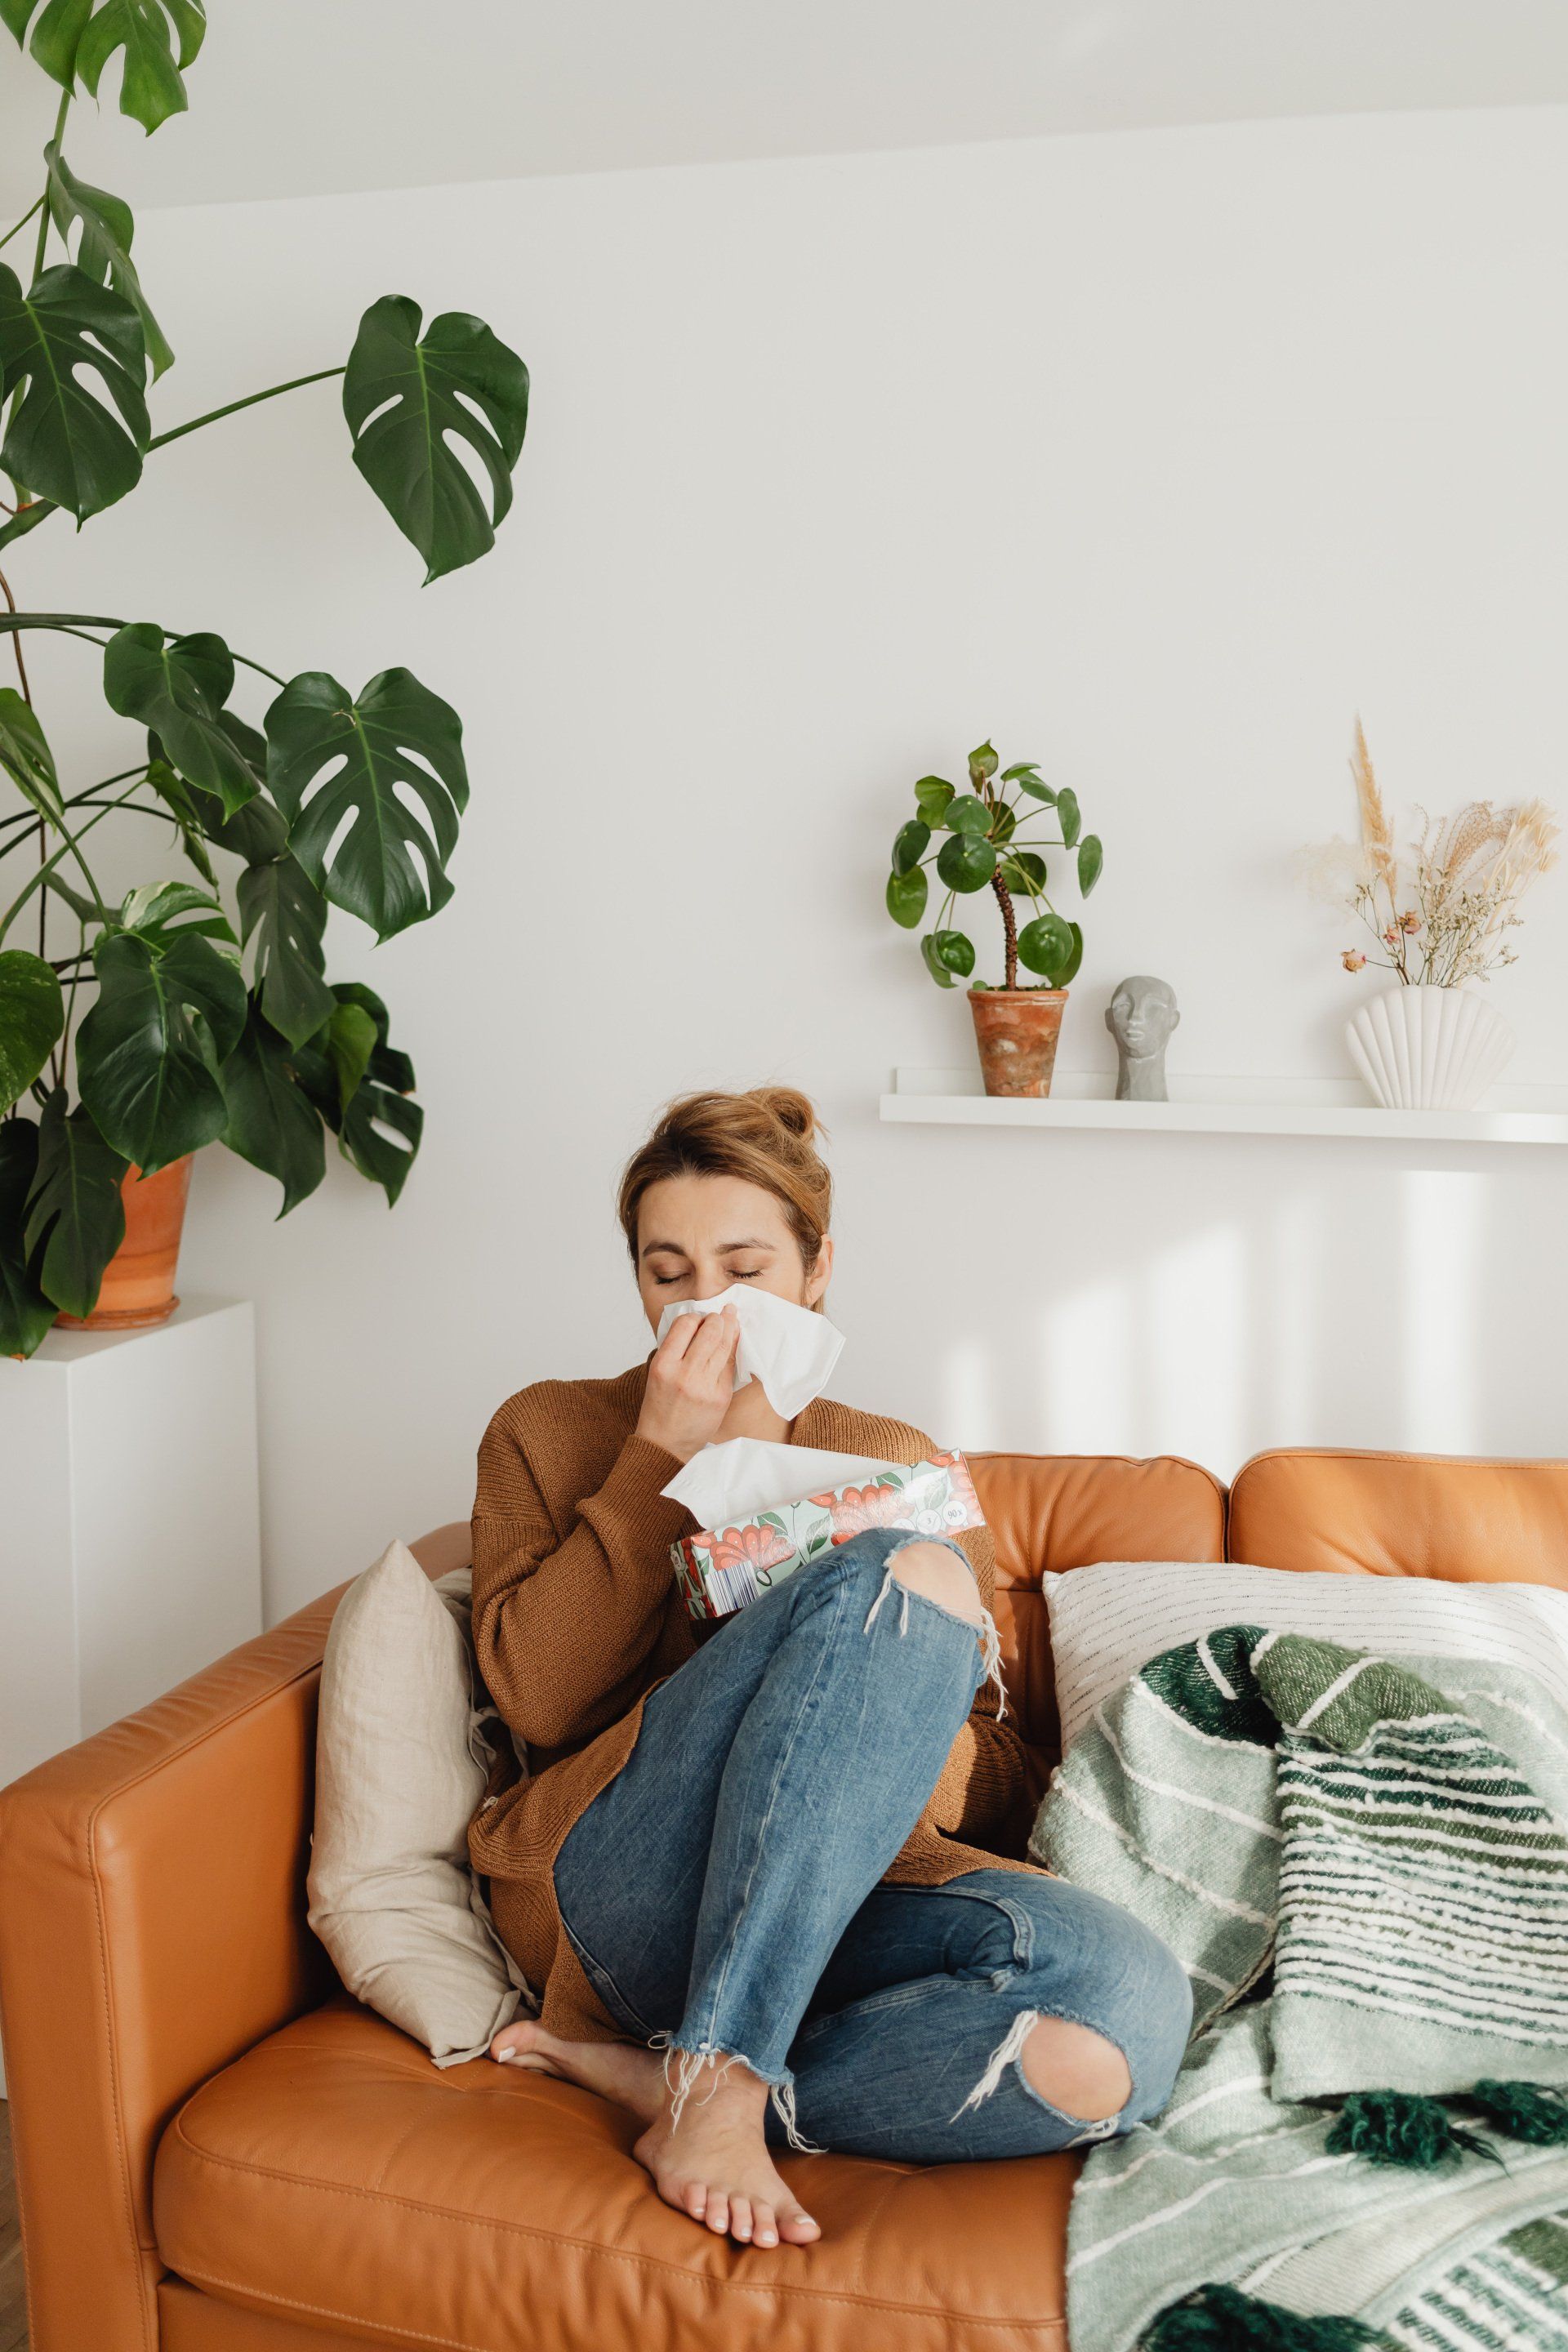 Say goodbye to allergies with regular cleaning